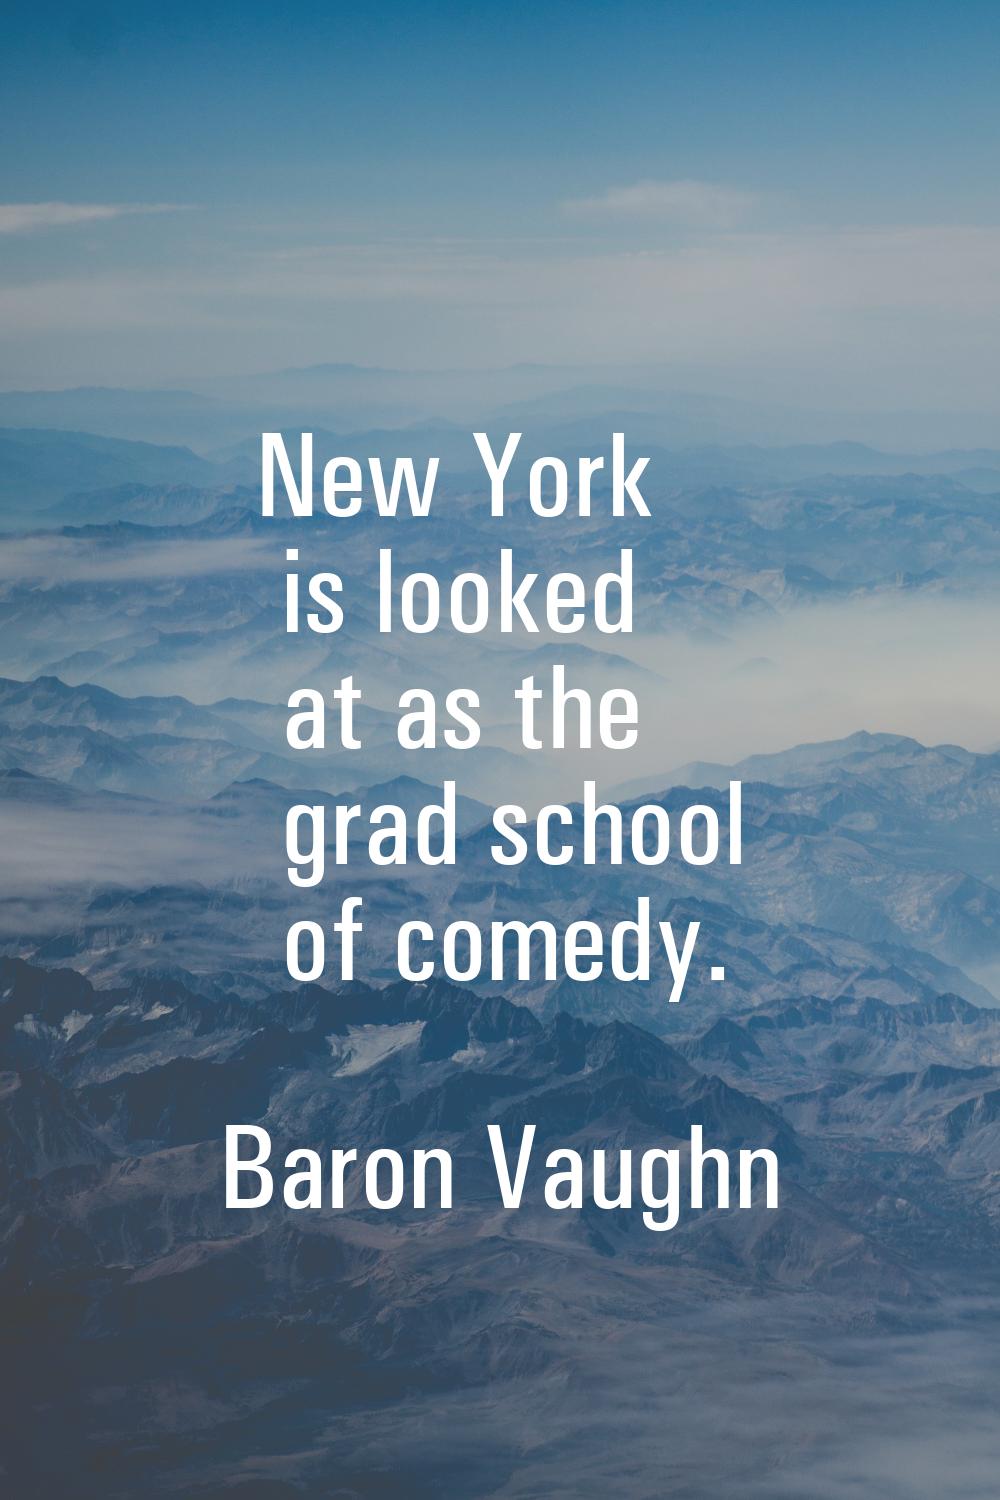 New York is looked at as the grad school of comedy.